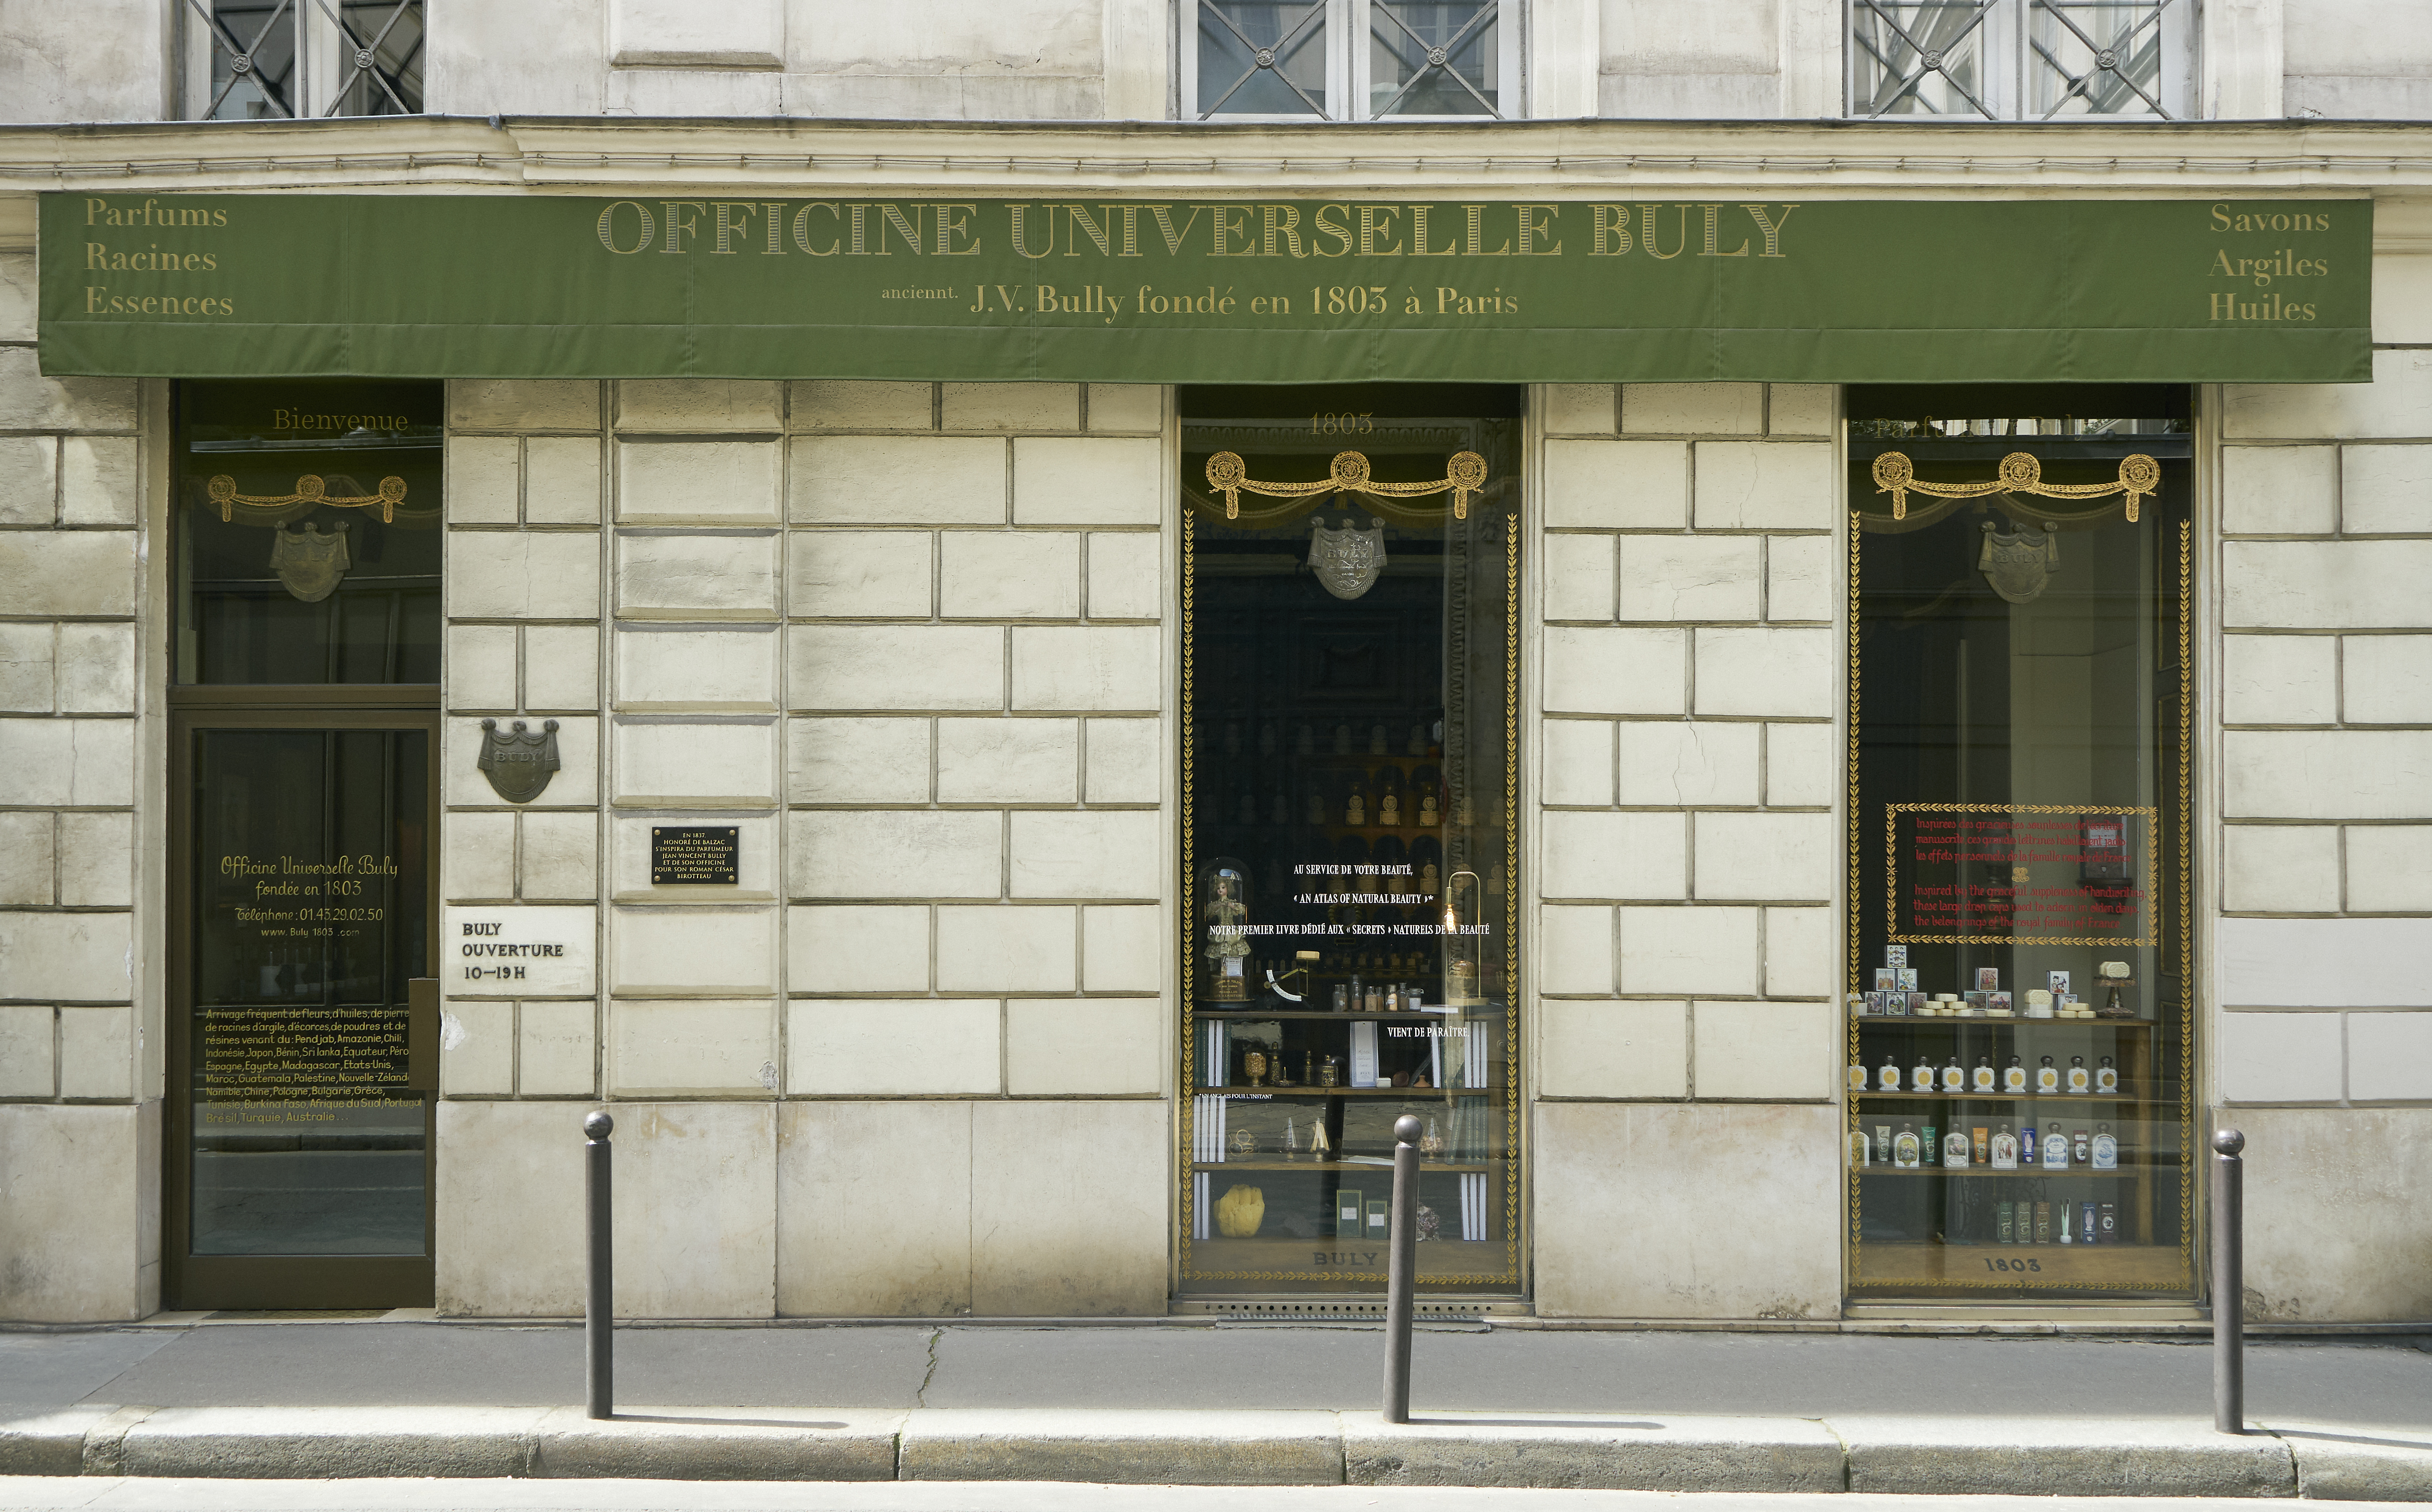 Officine Universelle Buly 1803